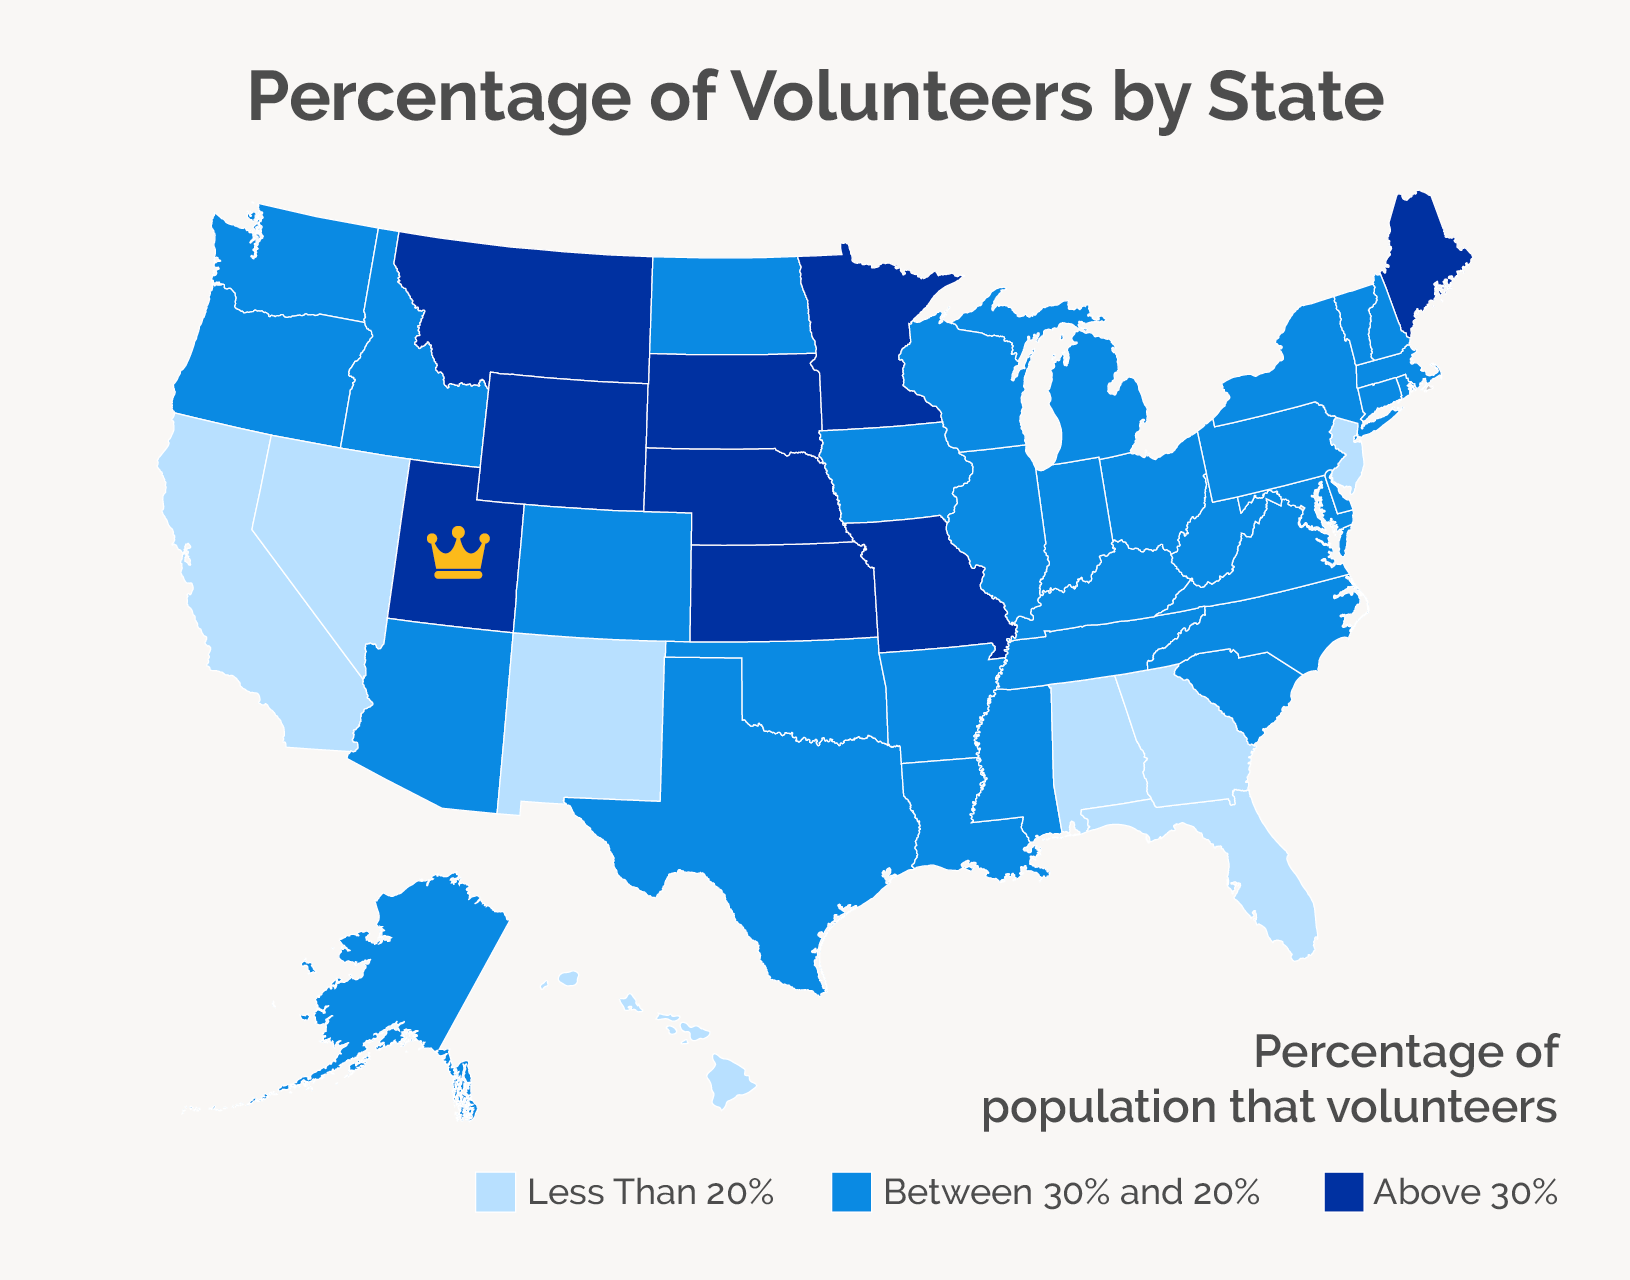 The image depicts the percentage of volunteers in each state population with Utah having the highest percentage. 